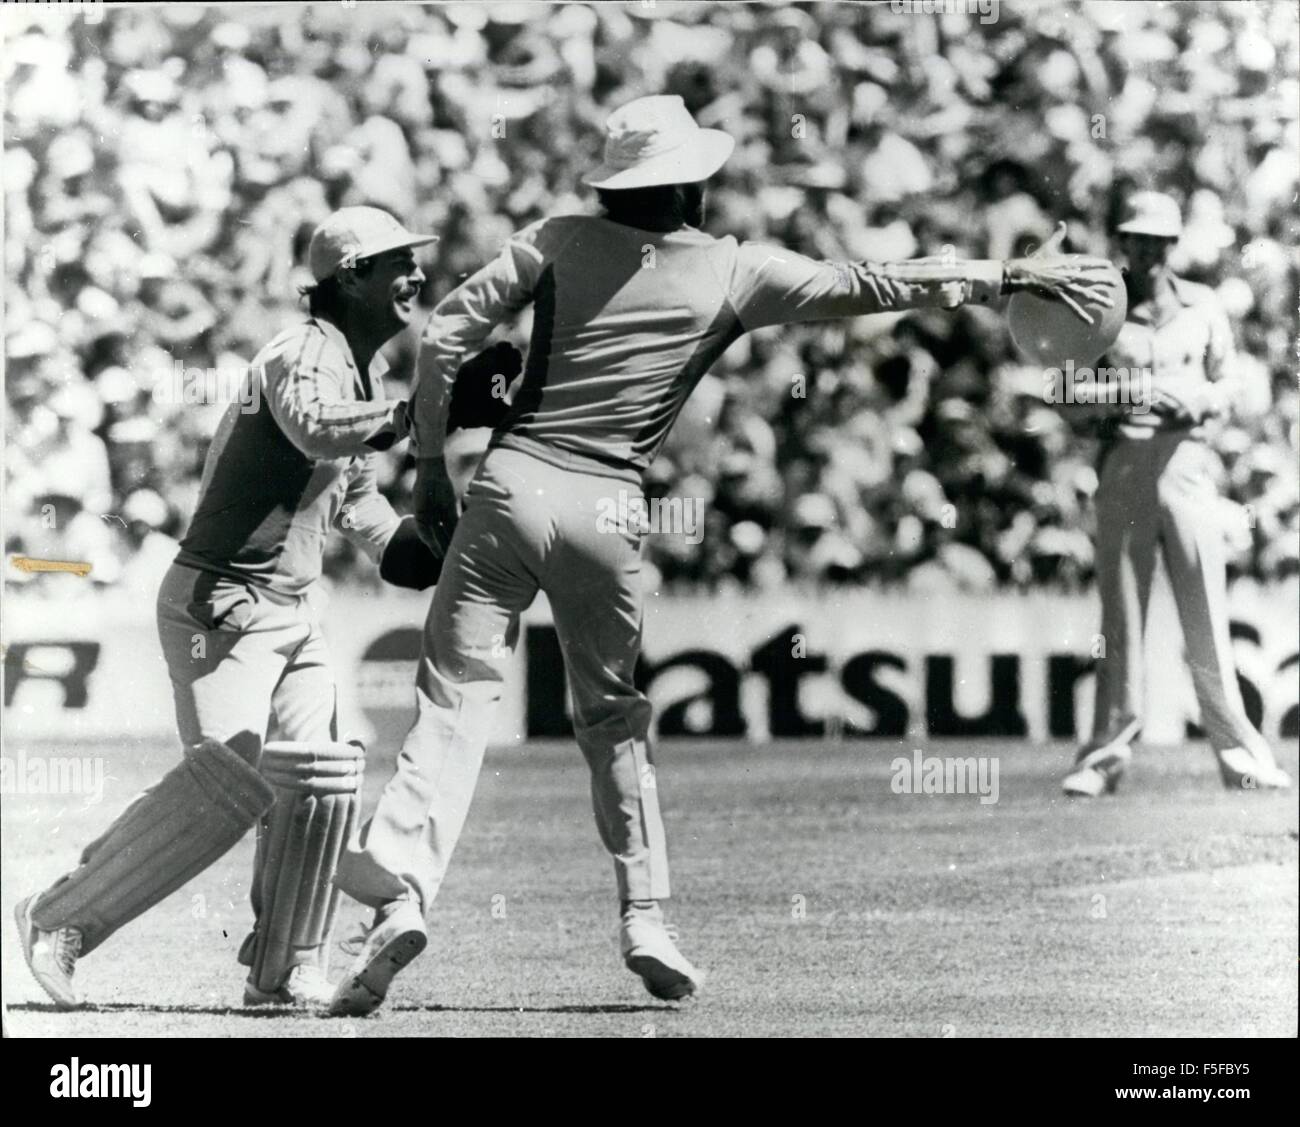 1967 - Howzat: Gregg Chappell, the Australian Captain, had a good grasp of on inflation, when he lunged to his right to take an easy catch of a wayward baloon - during the Australia-India one-day match in Sydney. His lightning reflexes delighted wicket keeper Rodney. Chappell handed it ti keeper Rodney Marsh who tucked it under his arms and strolled to the boundary to the delight of the players and spectators. © Keystone Pictures USA/ZUMAPRESS.com/Alamy Live News Stock Photo